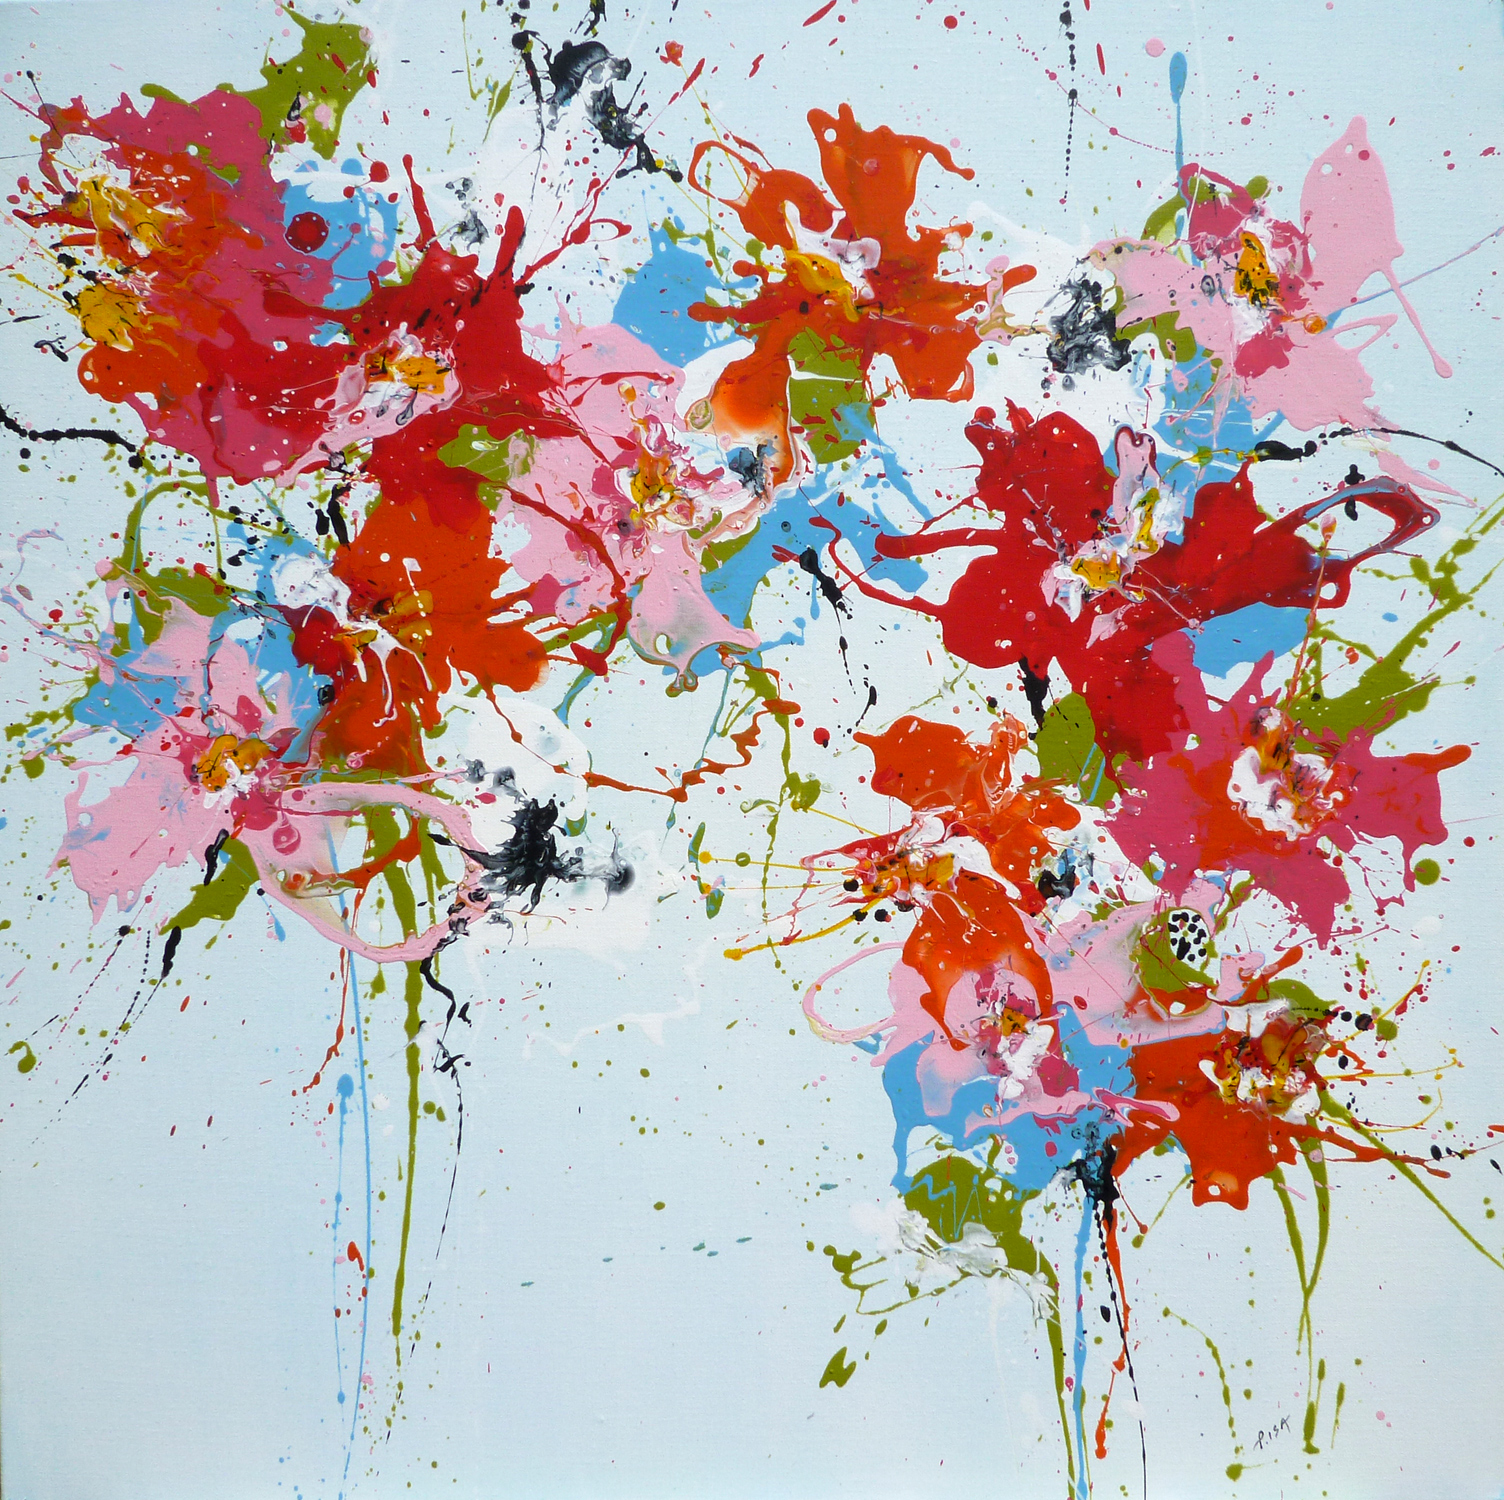 In the Siott Gallery Blog : “February Calls for Colorful Isabelle Pelletane Paintings.” (UK)